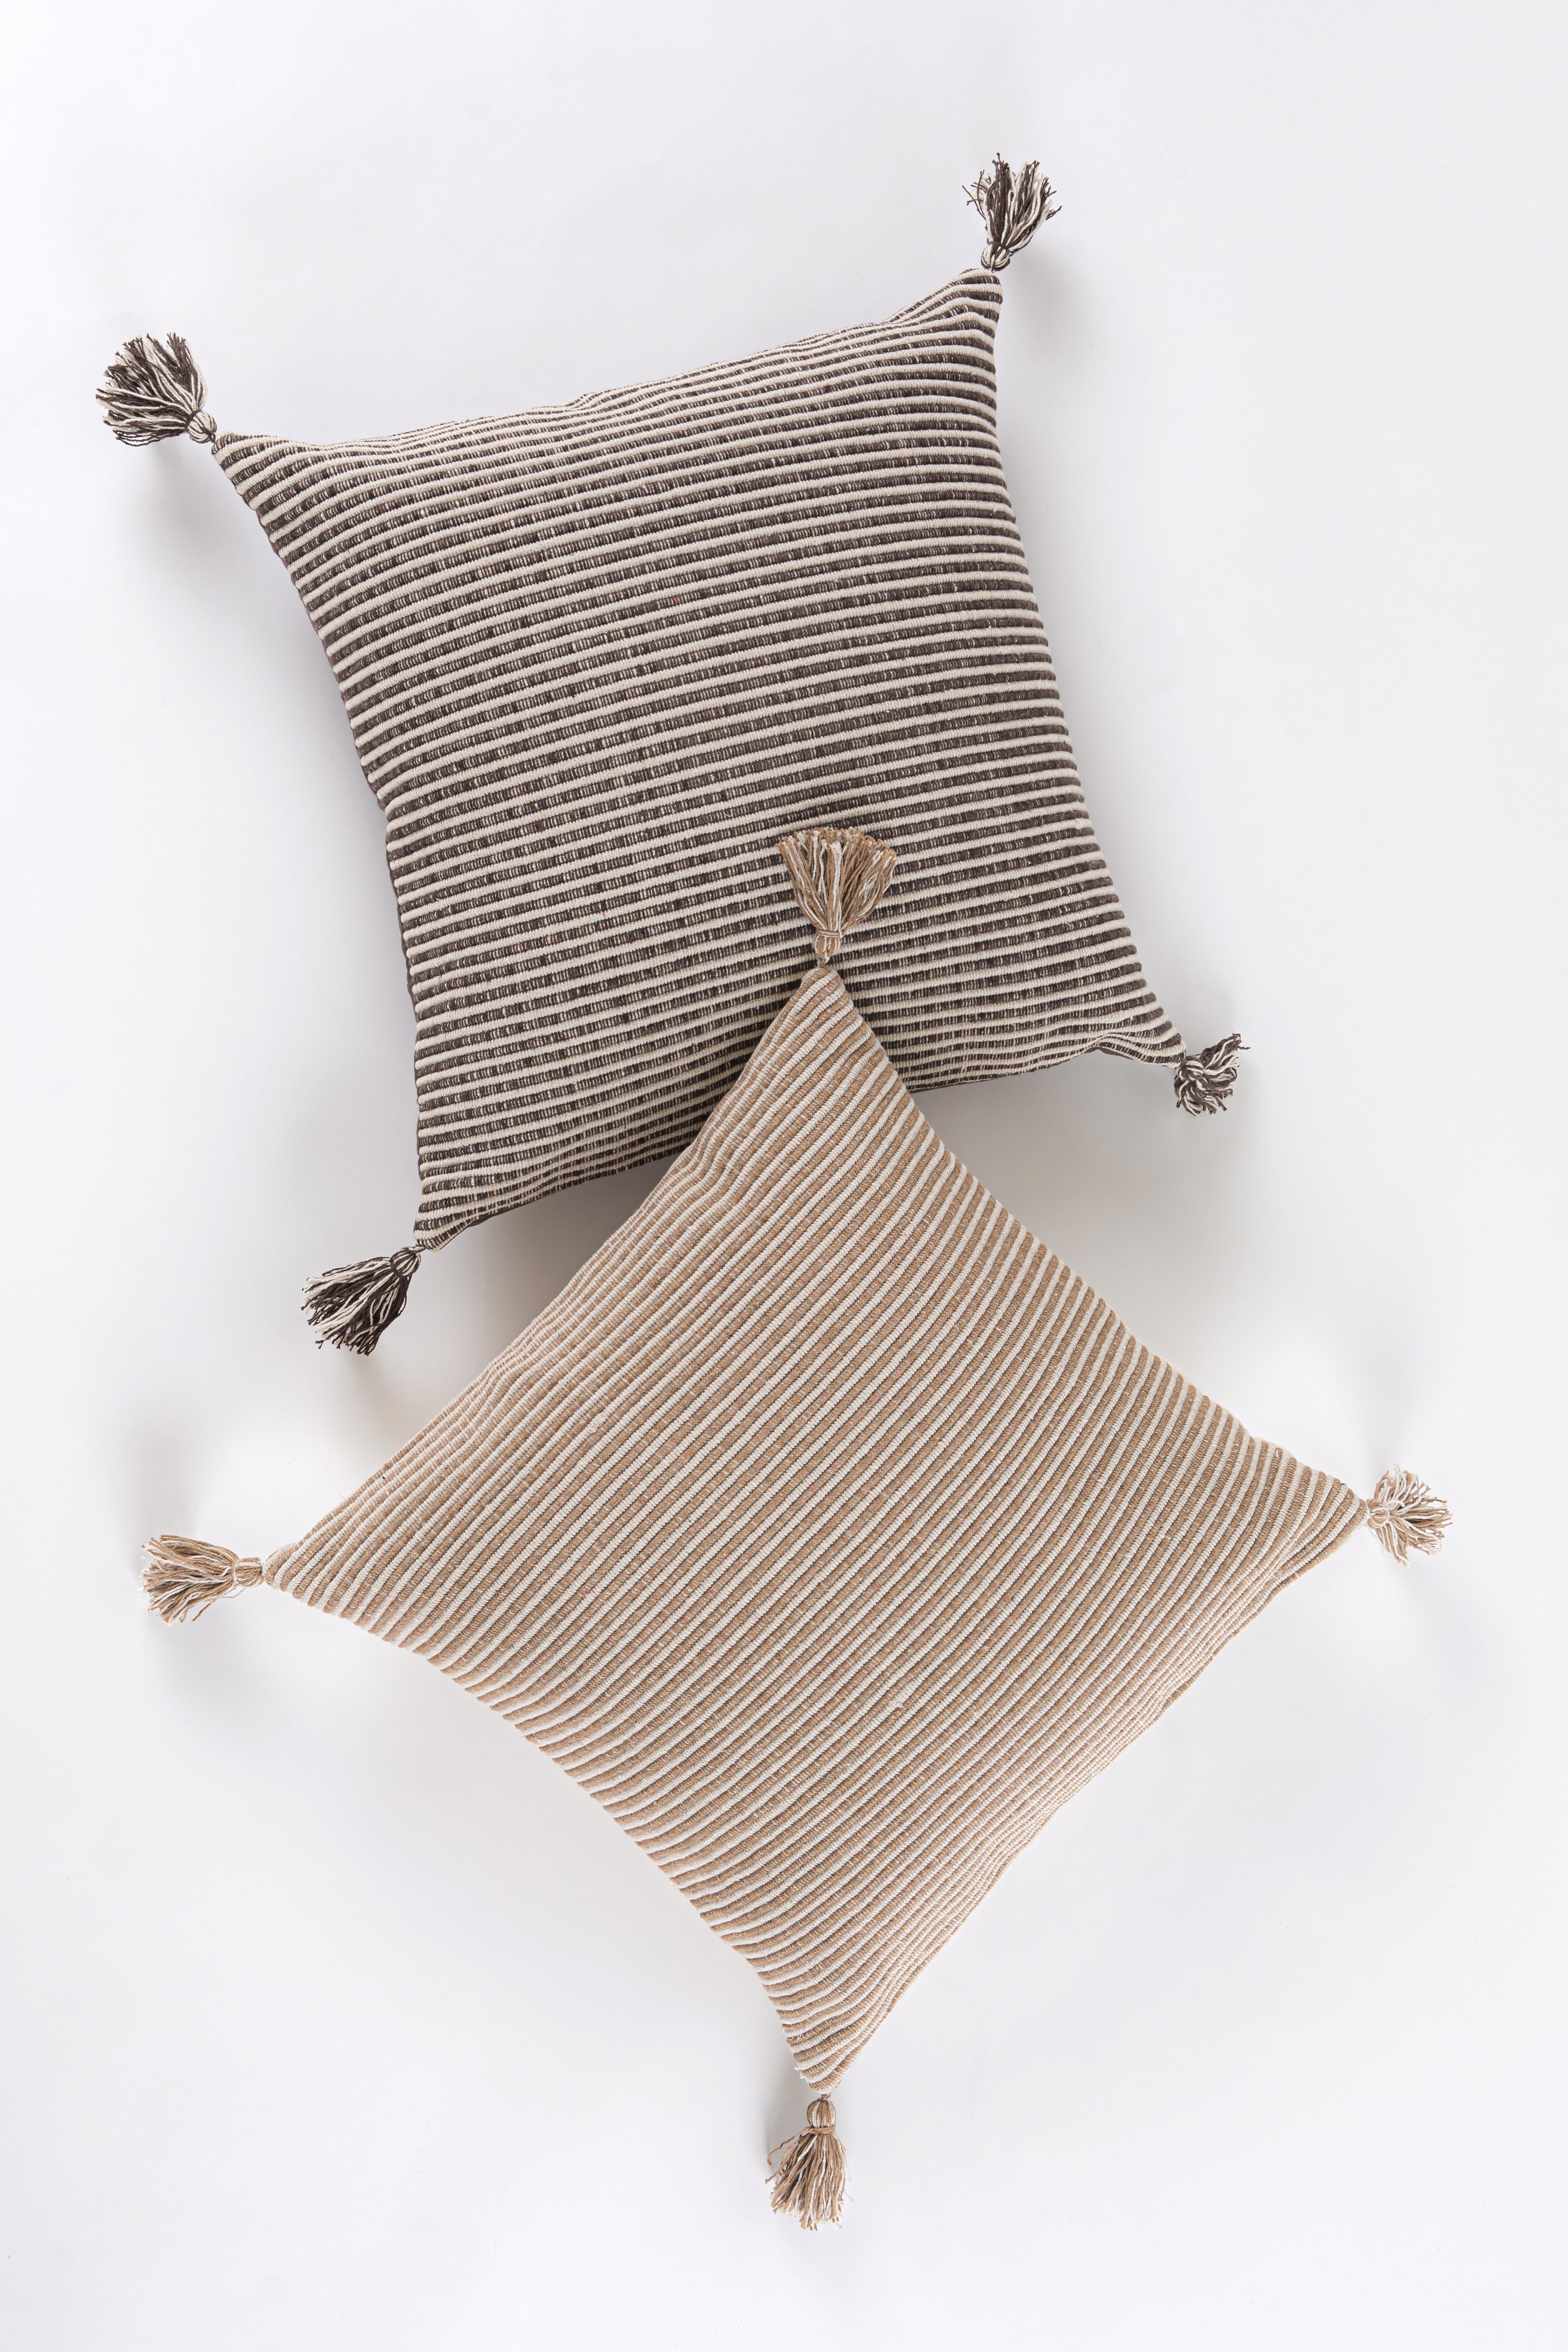 Stafford Striped Pillows, Neutrals, 24" x 24", Set of 2 - Image 1